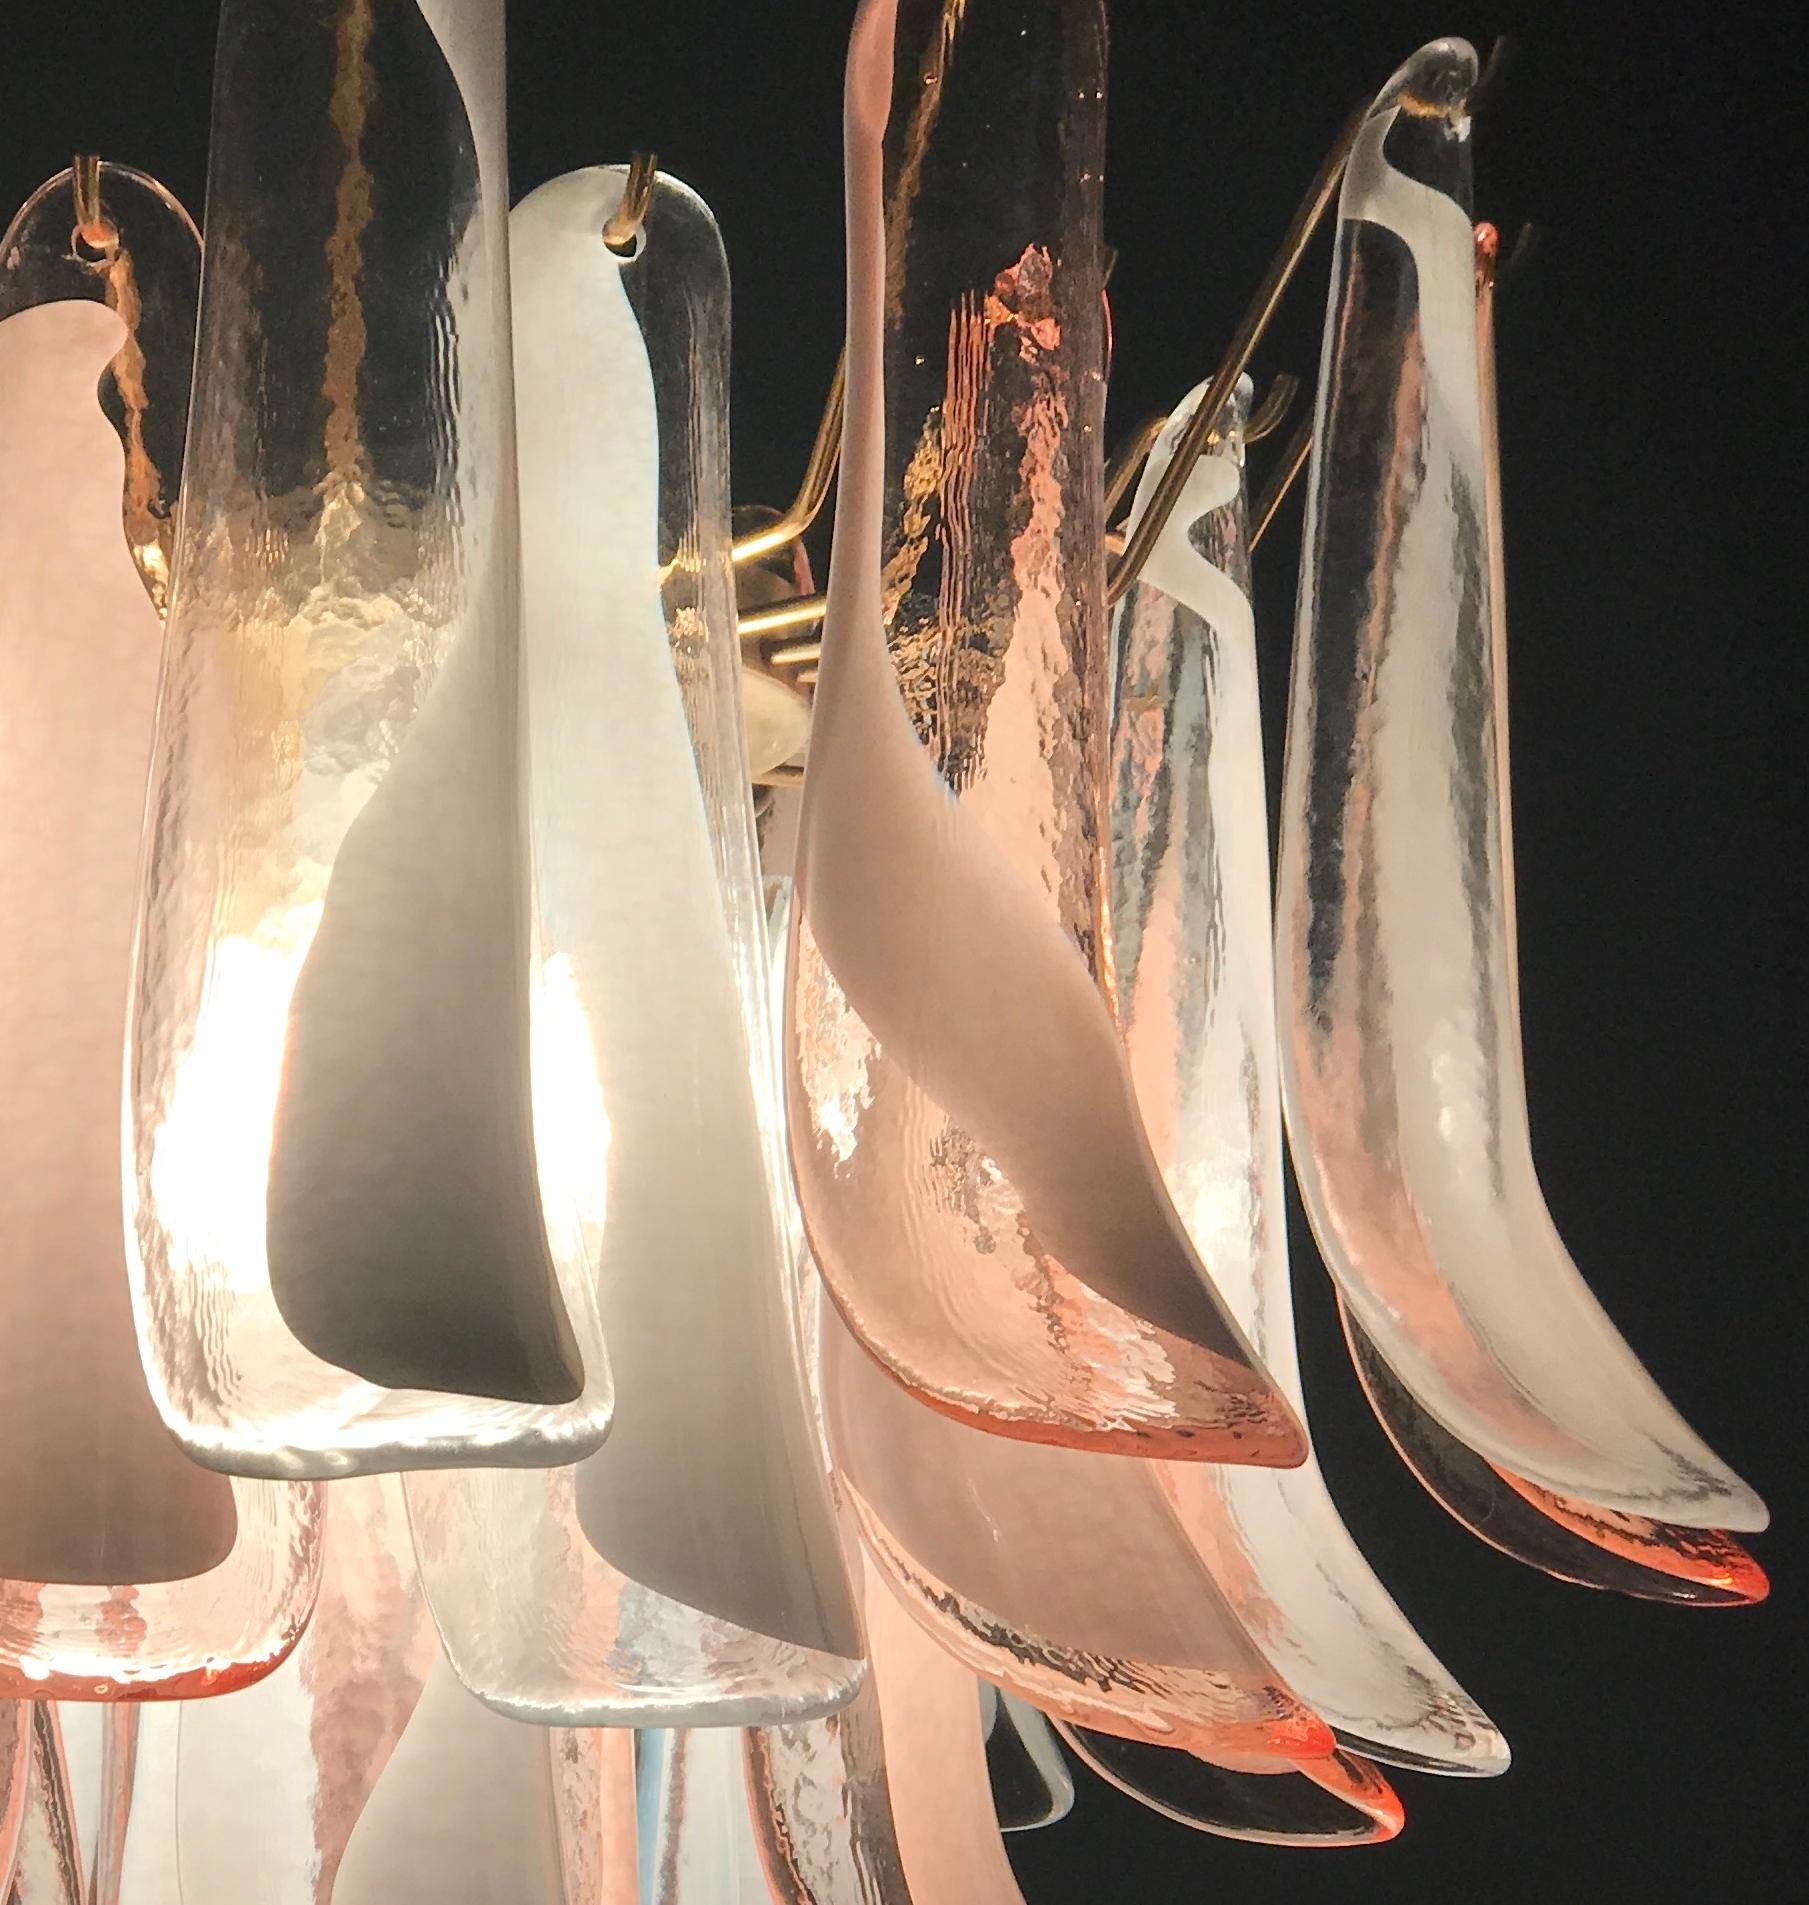 Charming Italian chandelier made by 50 glass petals (pink and white lattimo).
Measures: Height with chain cm 80, without chain cm 55 diameter cm 65.